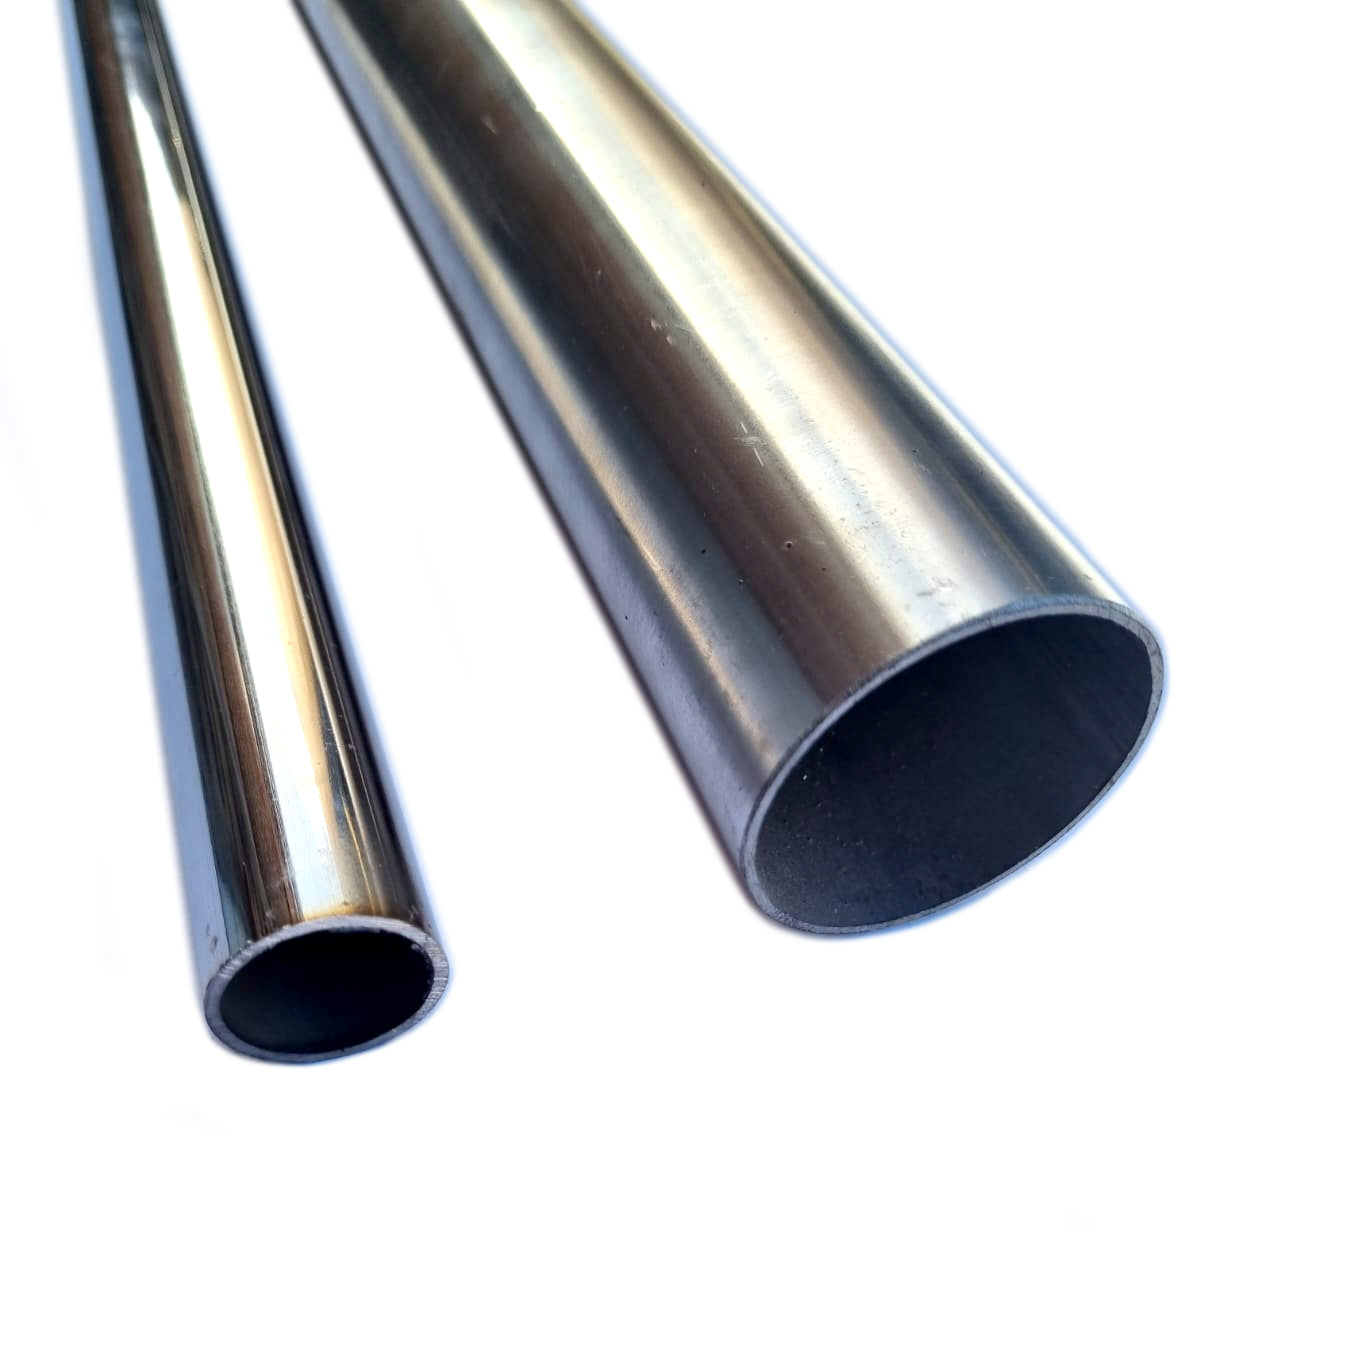 Pick The Wholesale stainless steel tube 76 mm You Need 